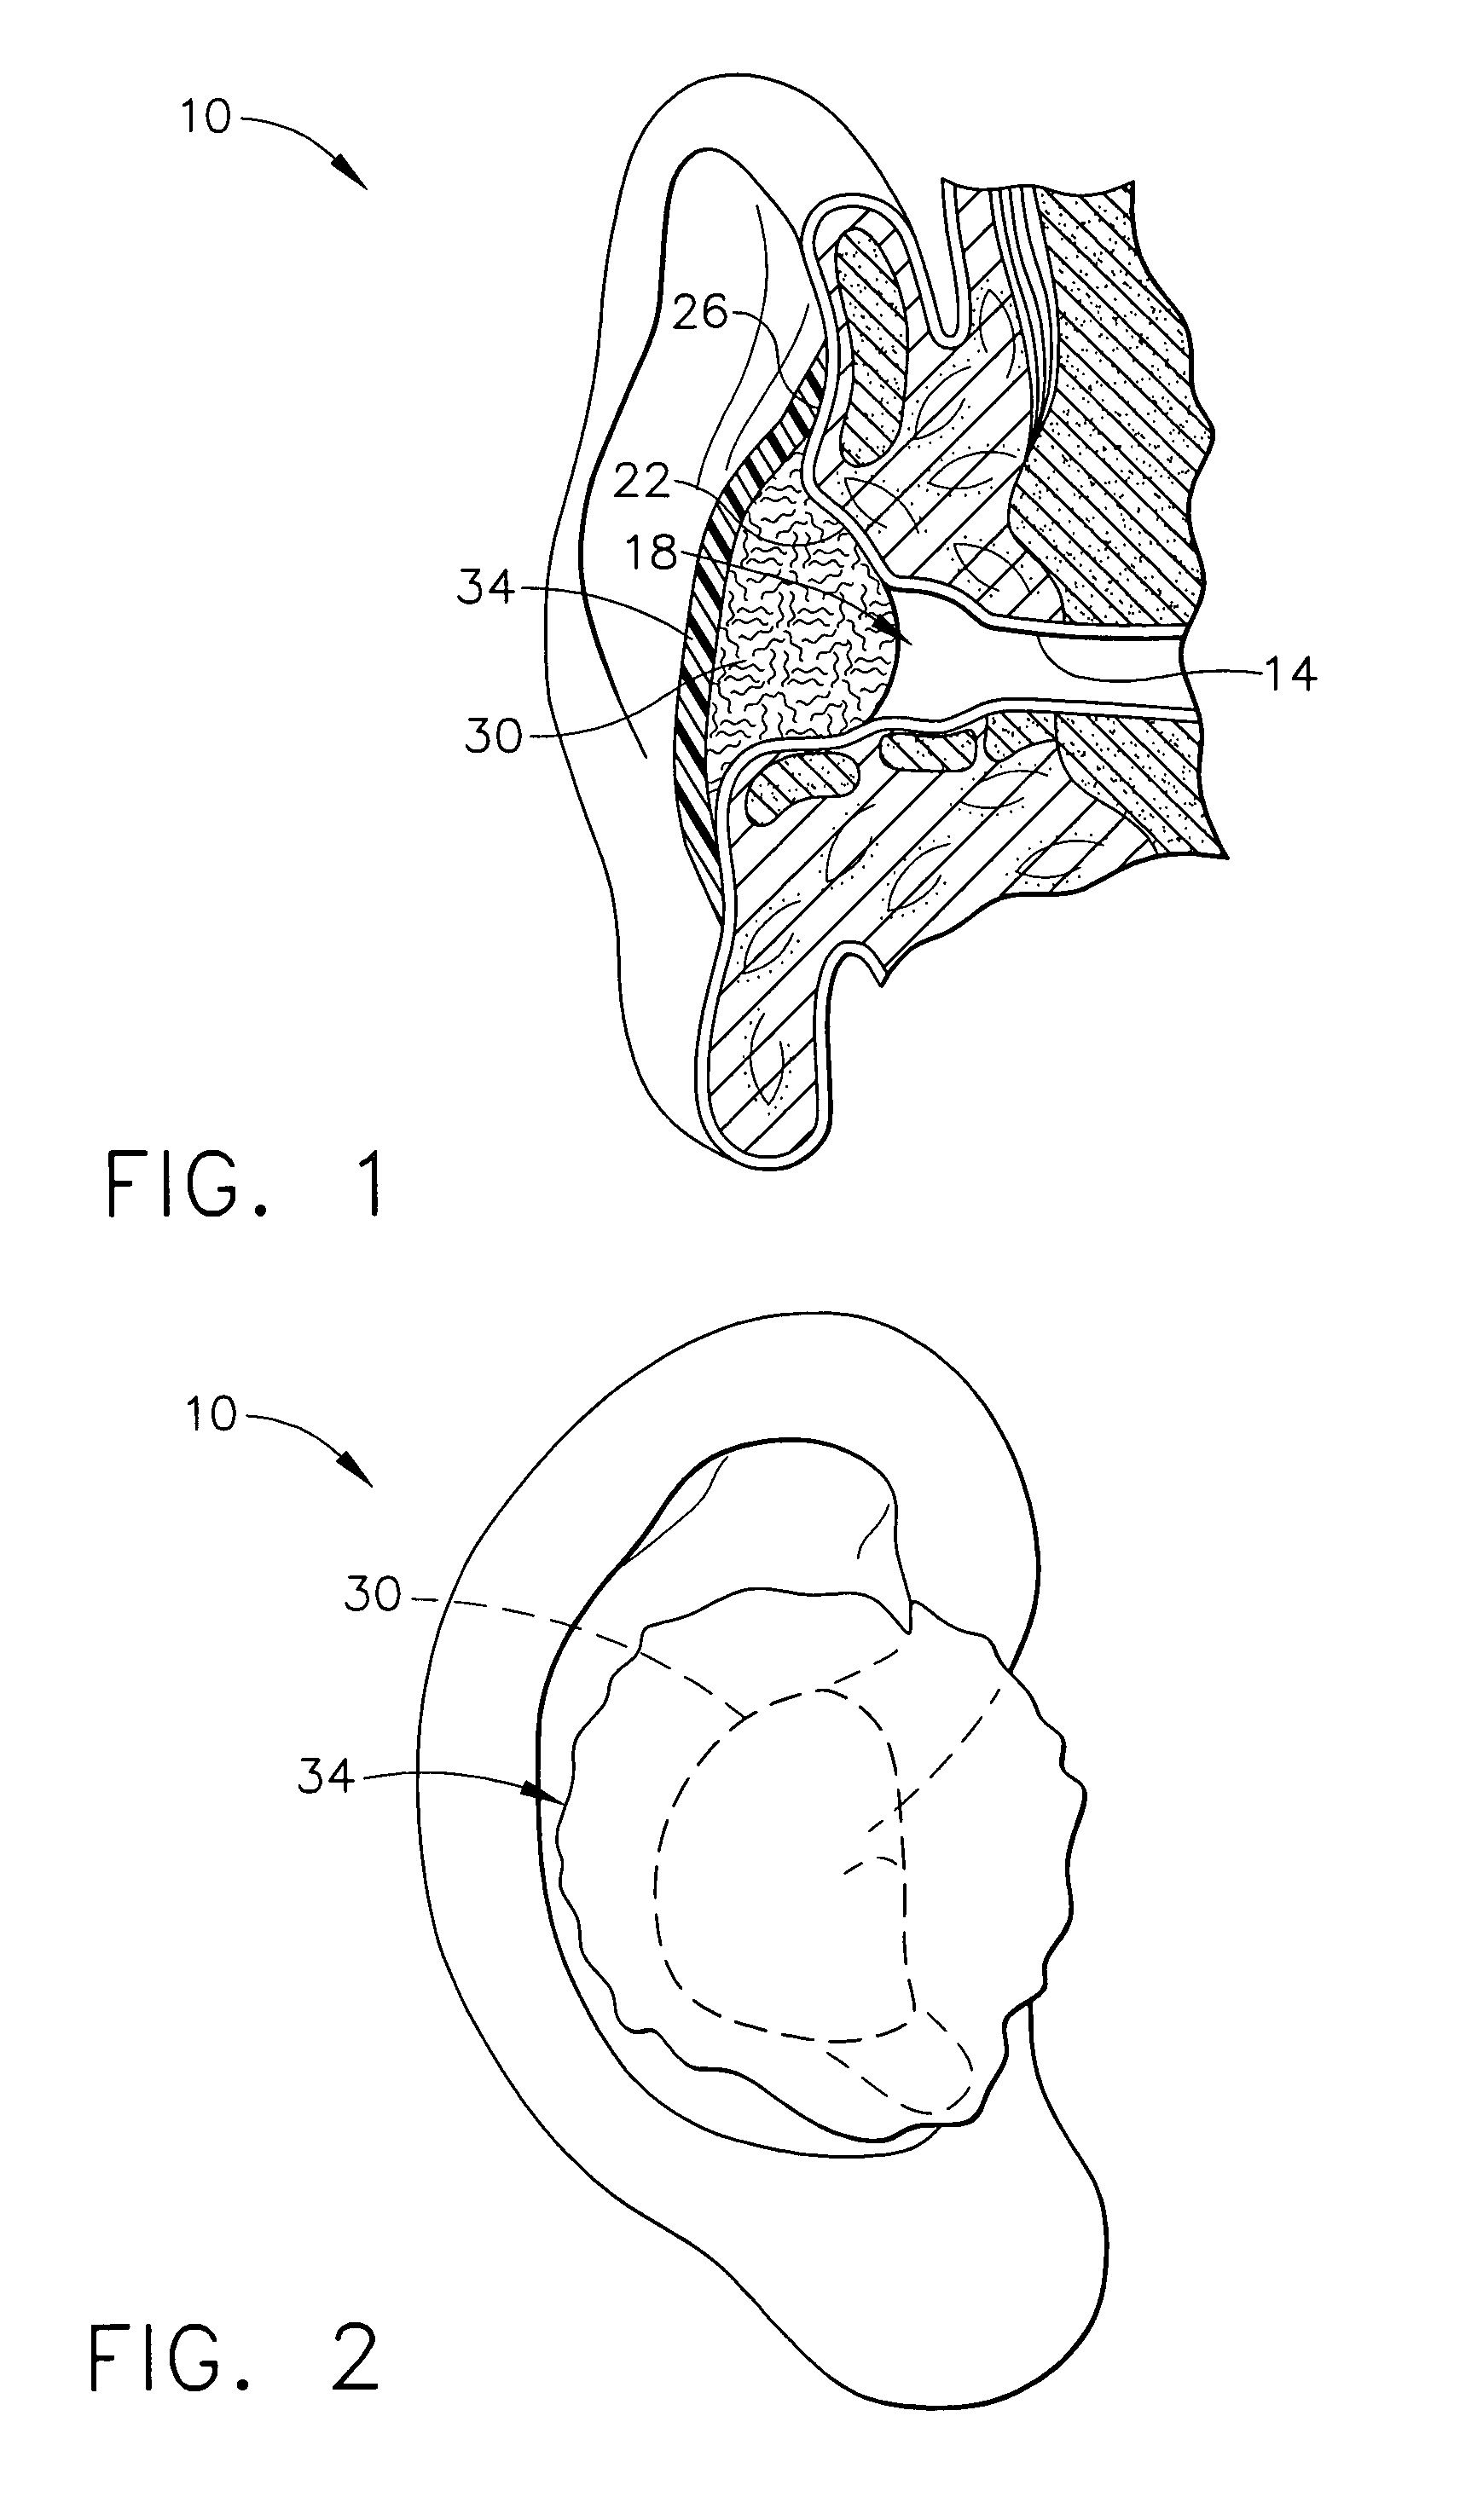 Method for forming occlusive barrier over ear canal and kit for providing same